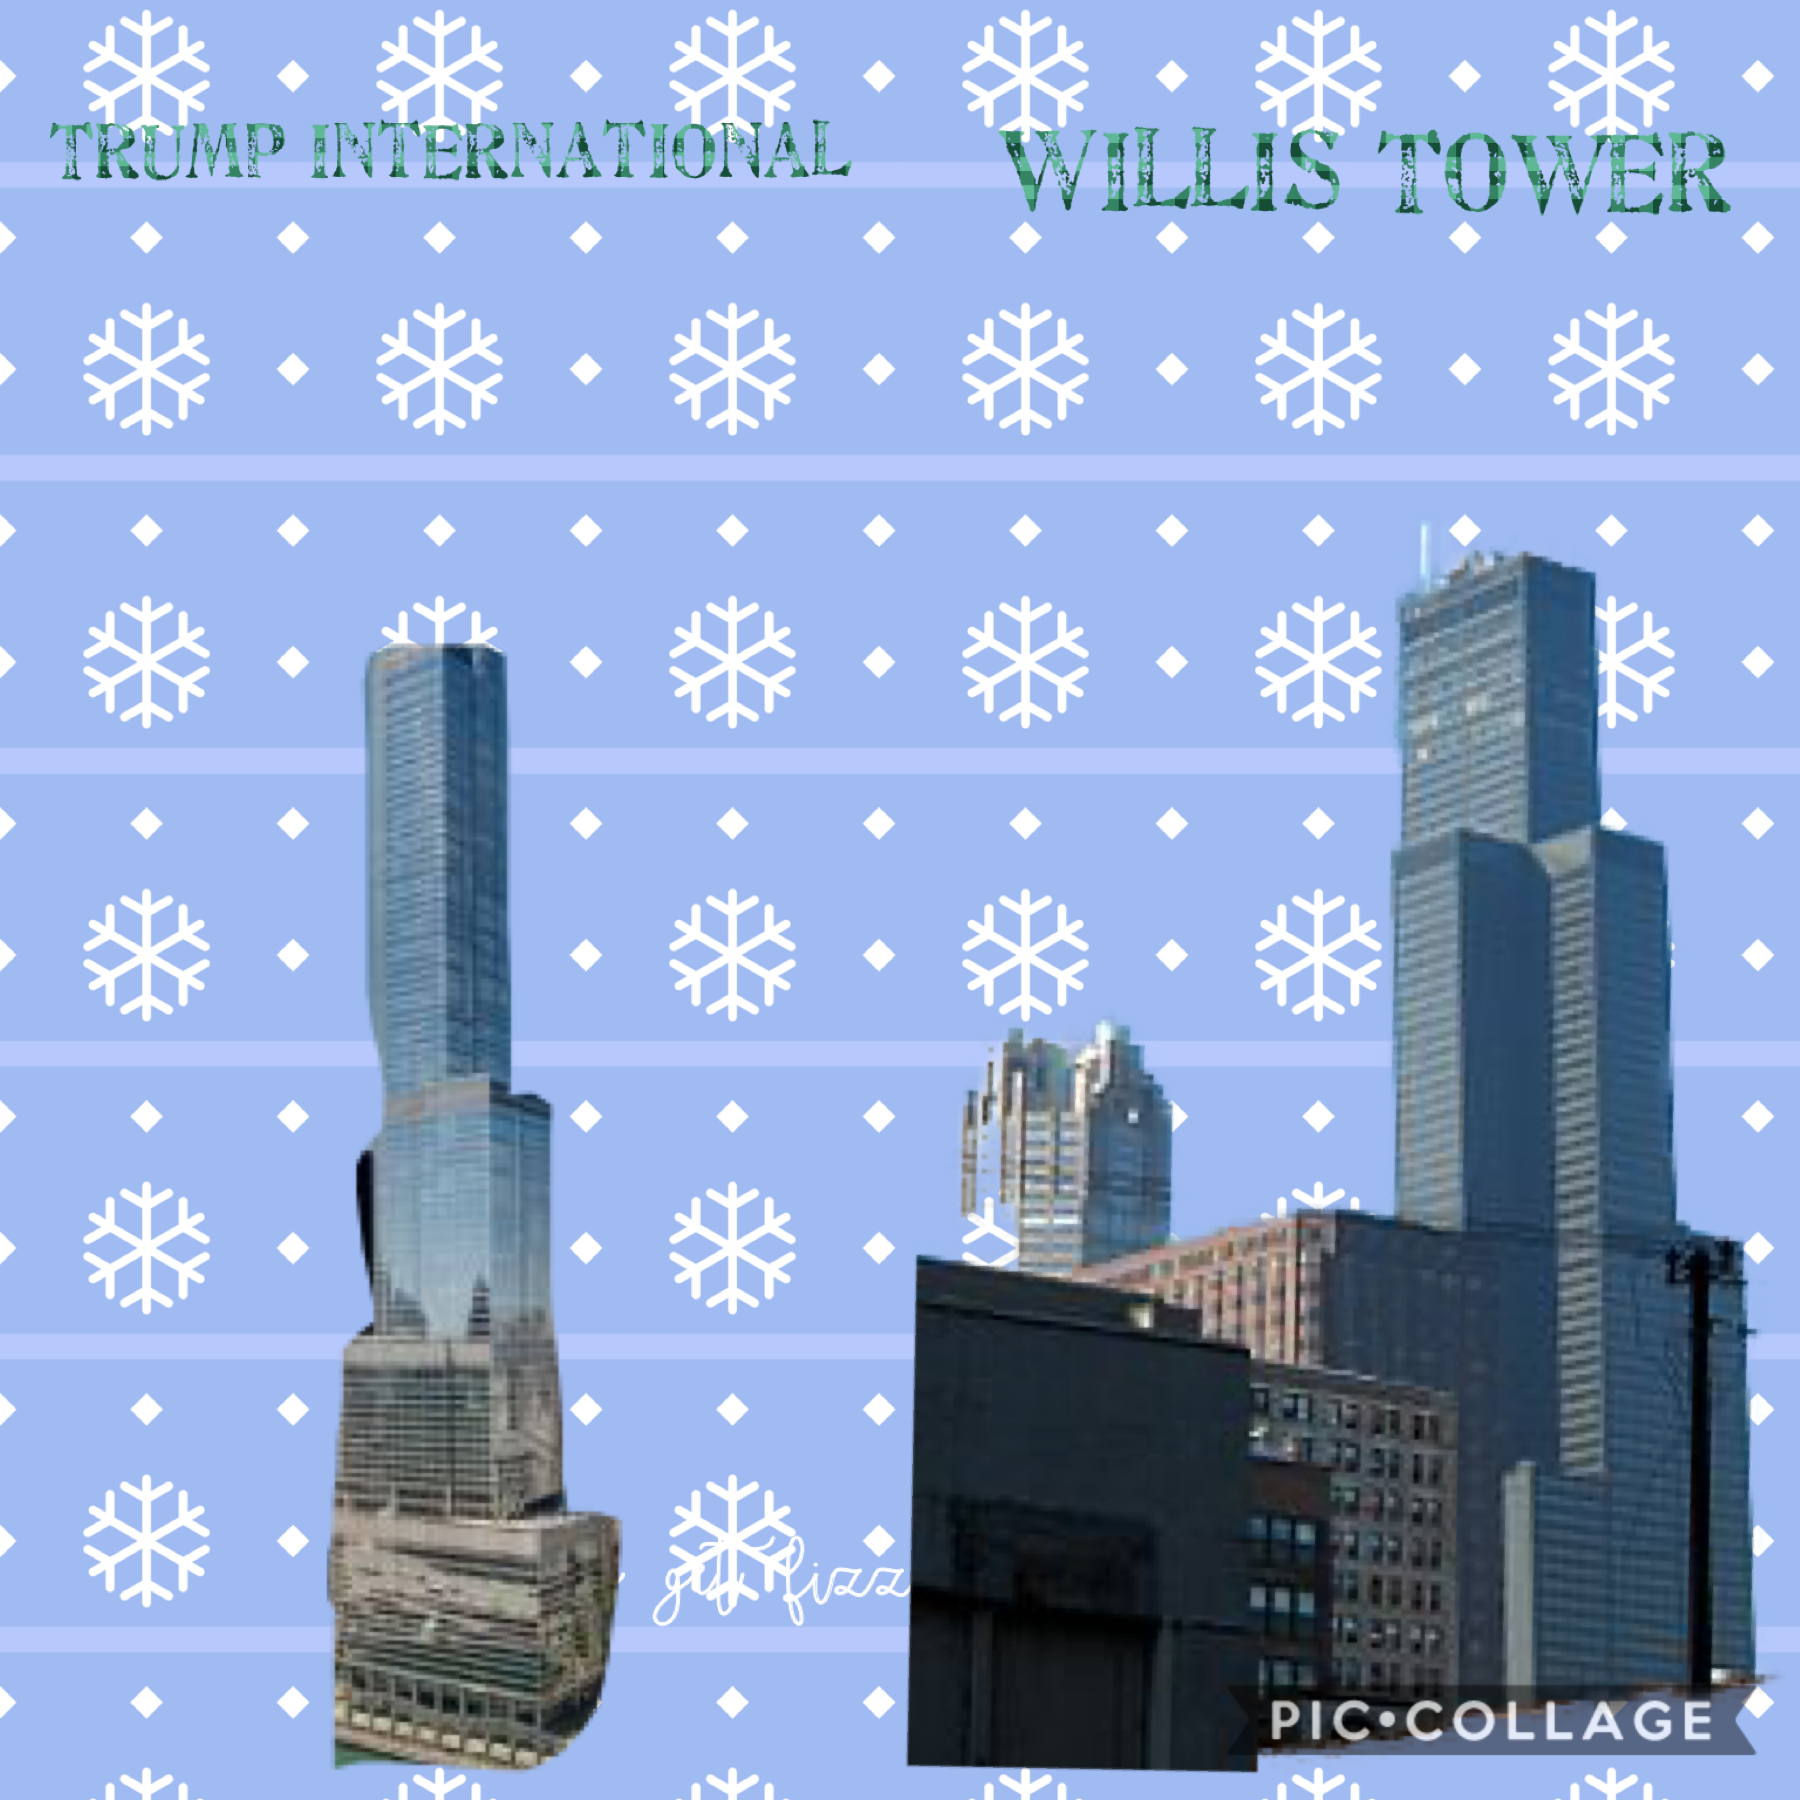 2 Tallest Buildings In Chicago!